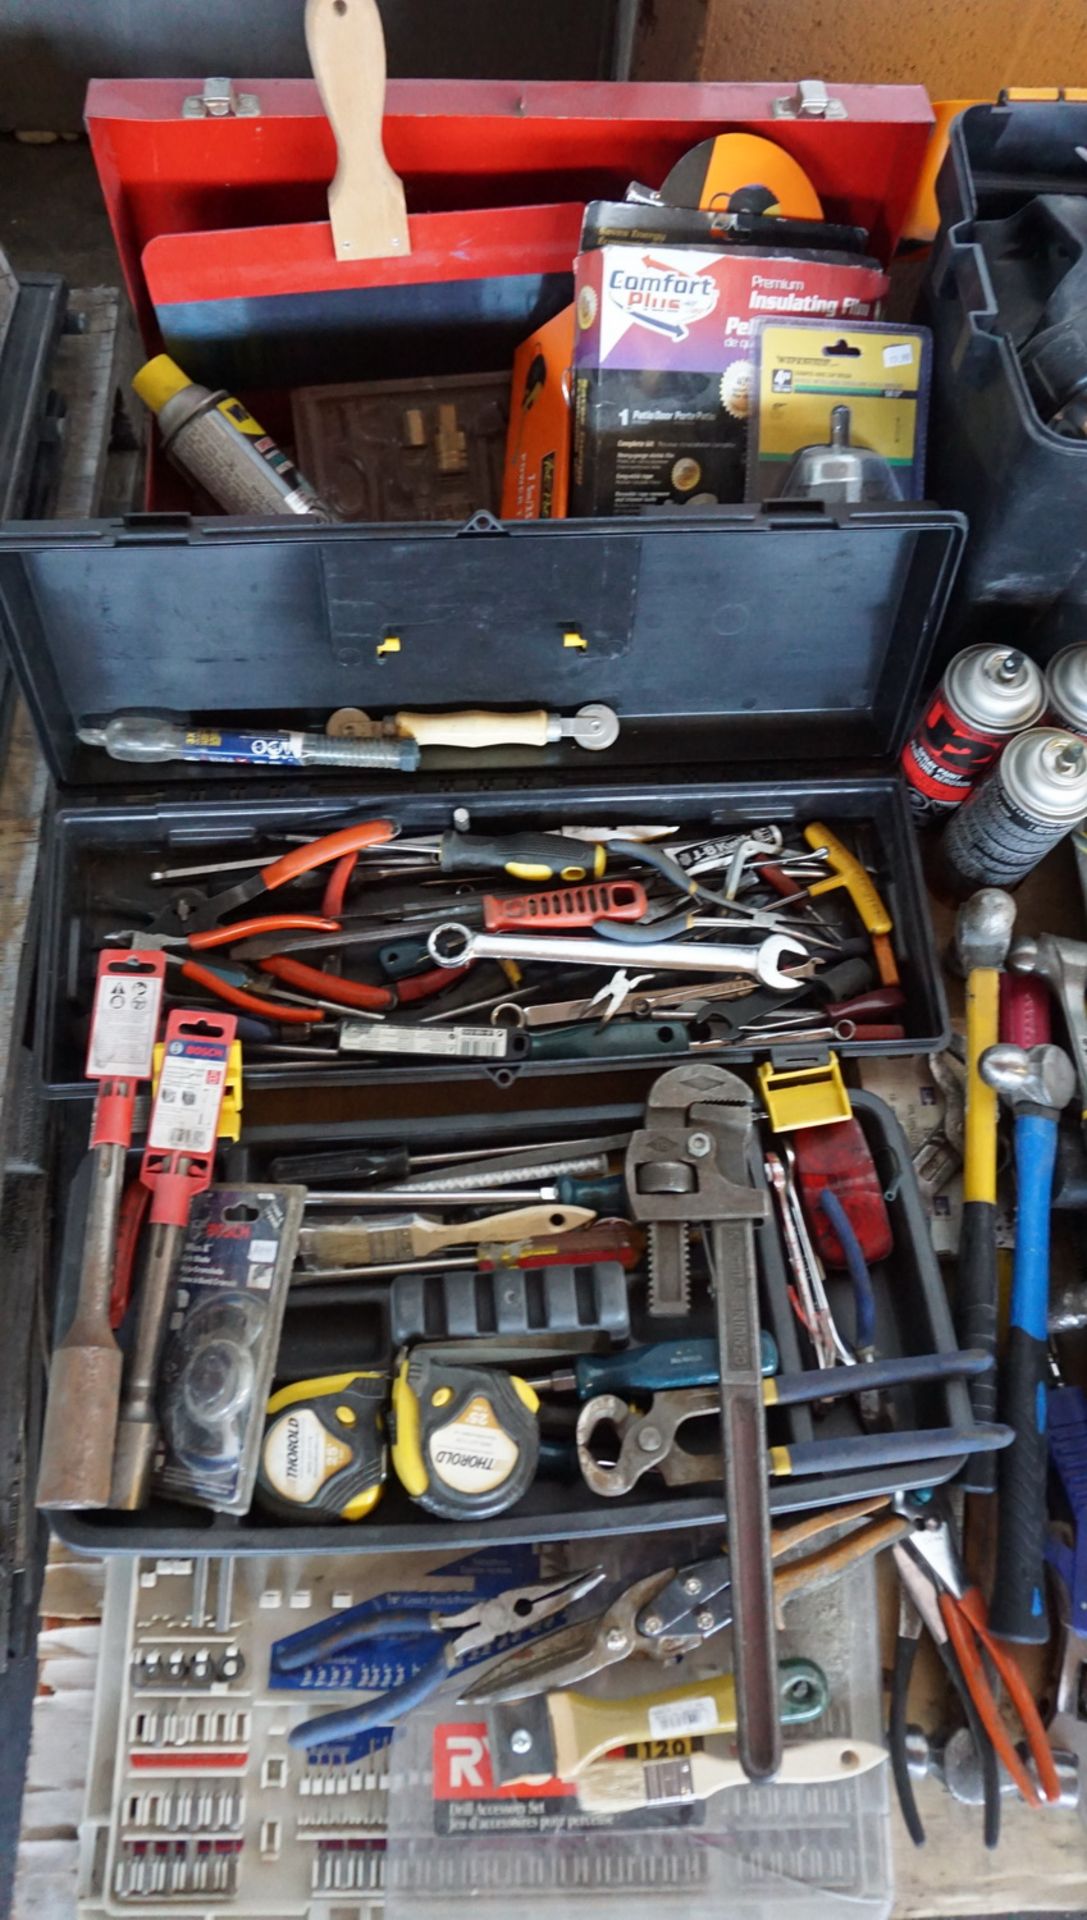 LOT - HAND TOOLS, TOOL BOXES, KNEE PADS, ETC (1 SKID) - Image 2 of 3